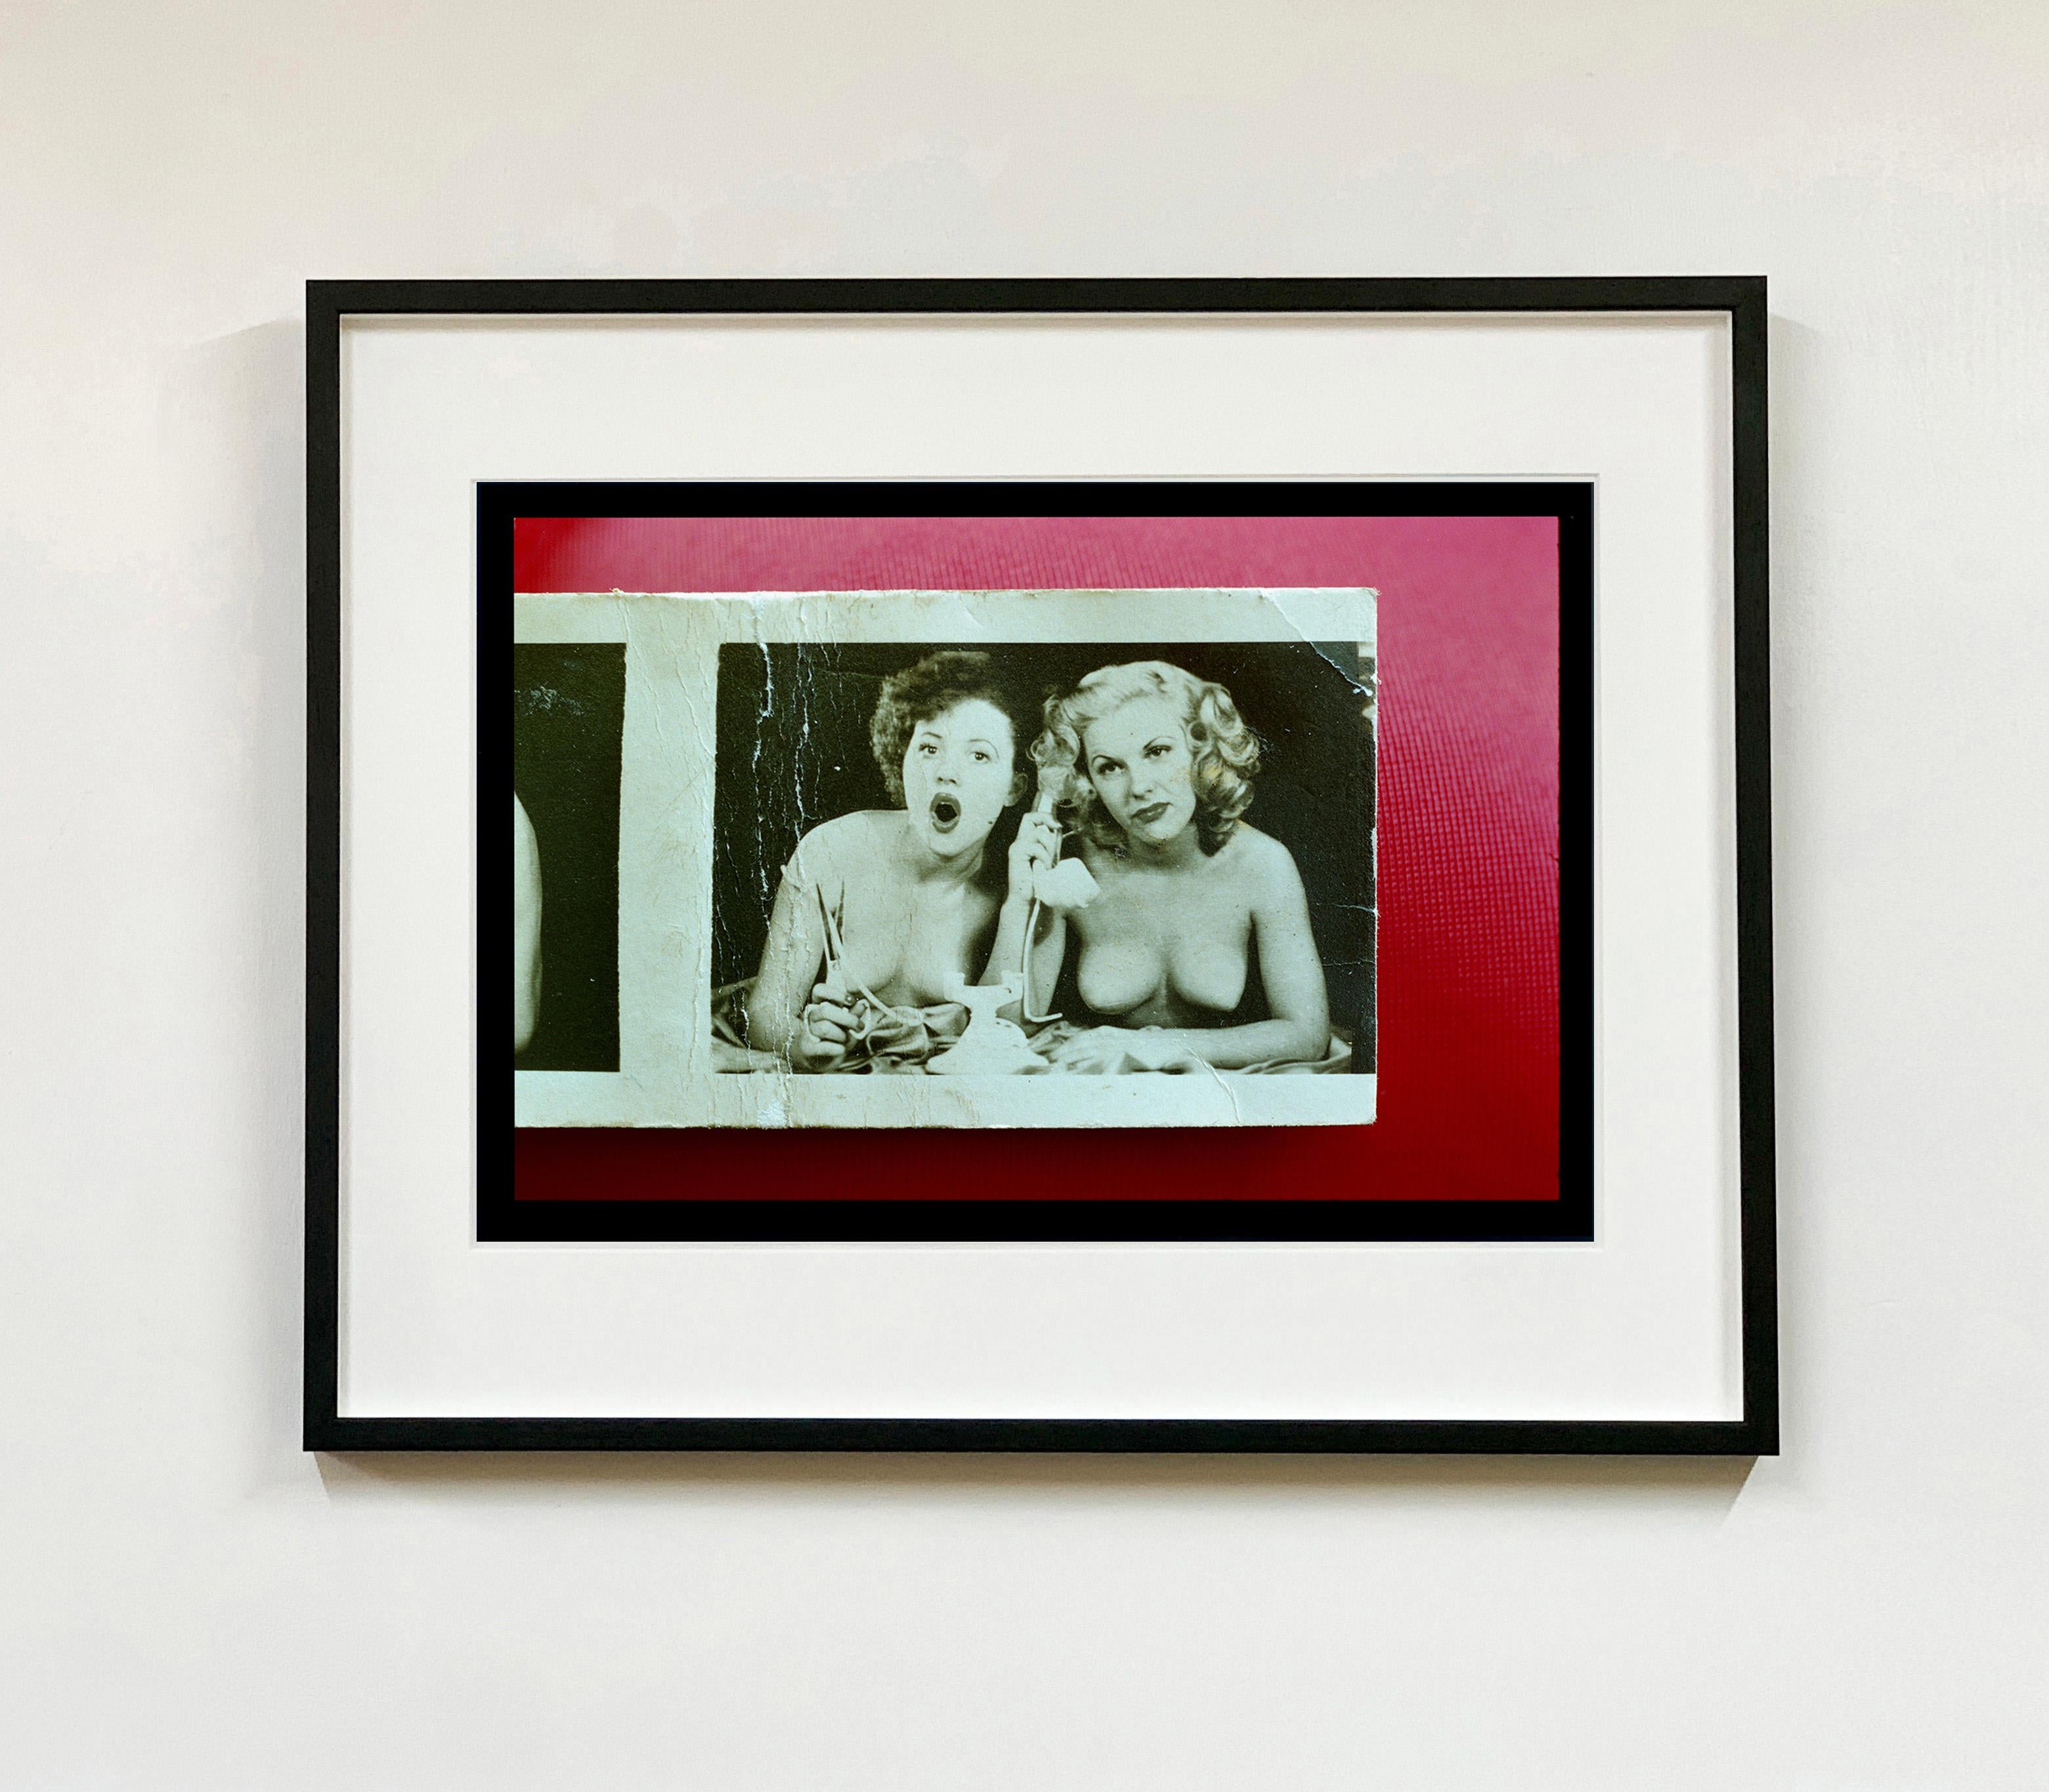 Jersey Girls Magenta, photograph from Richard Heeps Jersey Shore series.
Vintage matchbooks from New York's Chelsea Flea Market featuring nudes from the 1940's are reimagined by Richard Heeps in this colour photoshoot.

This artwork is a limited